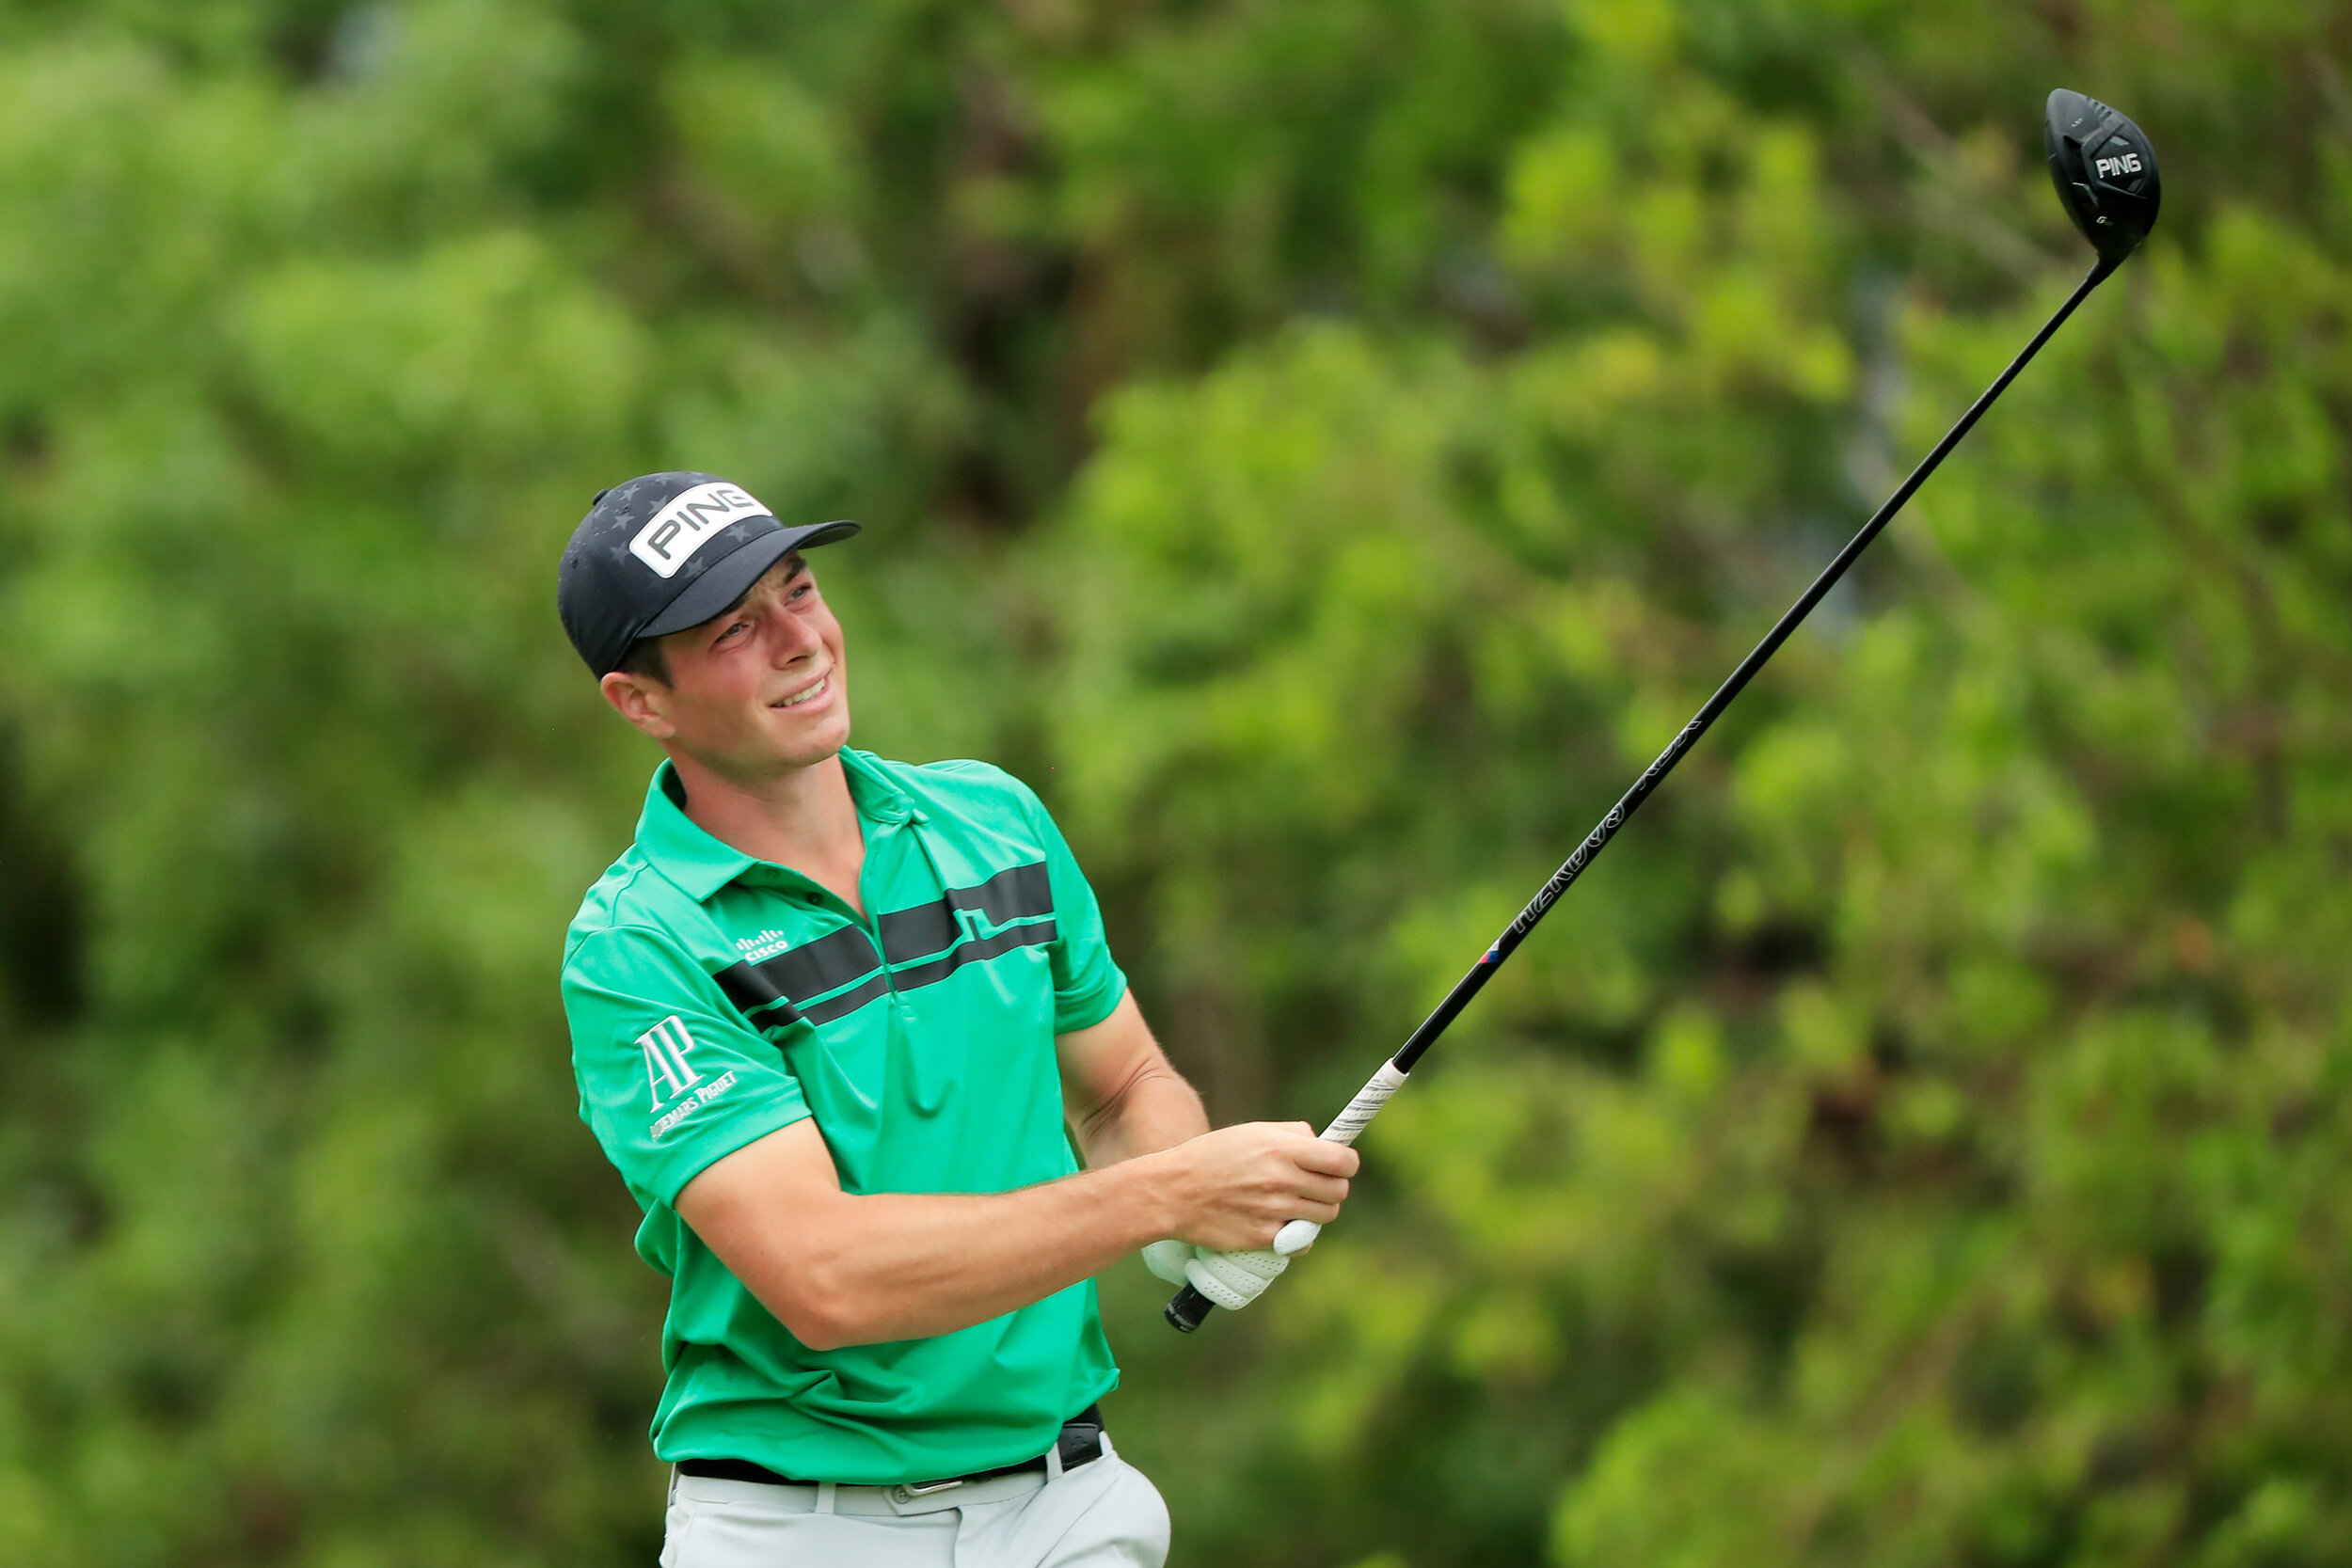  PLAYA DEL CARMEN, MEXICO - DECEMBER 06: Viktor Hovland of Norway plays his shot from the second tee during the final round of the Mayakoba Golf Classic at El Camaleón Golf Club on December 06, 2020 in Playa del Carmen, Mexico. (Photo by Cliff Hawkin